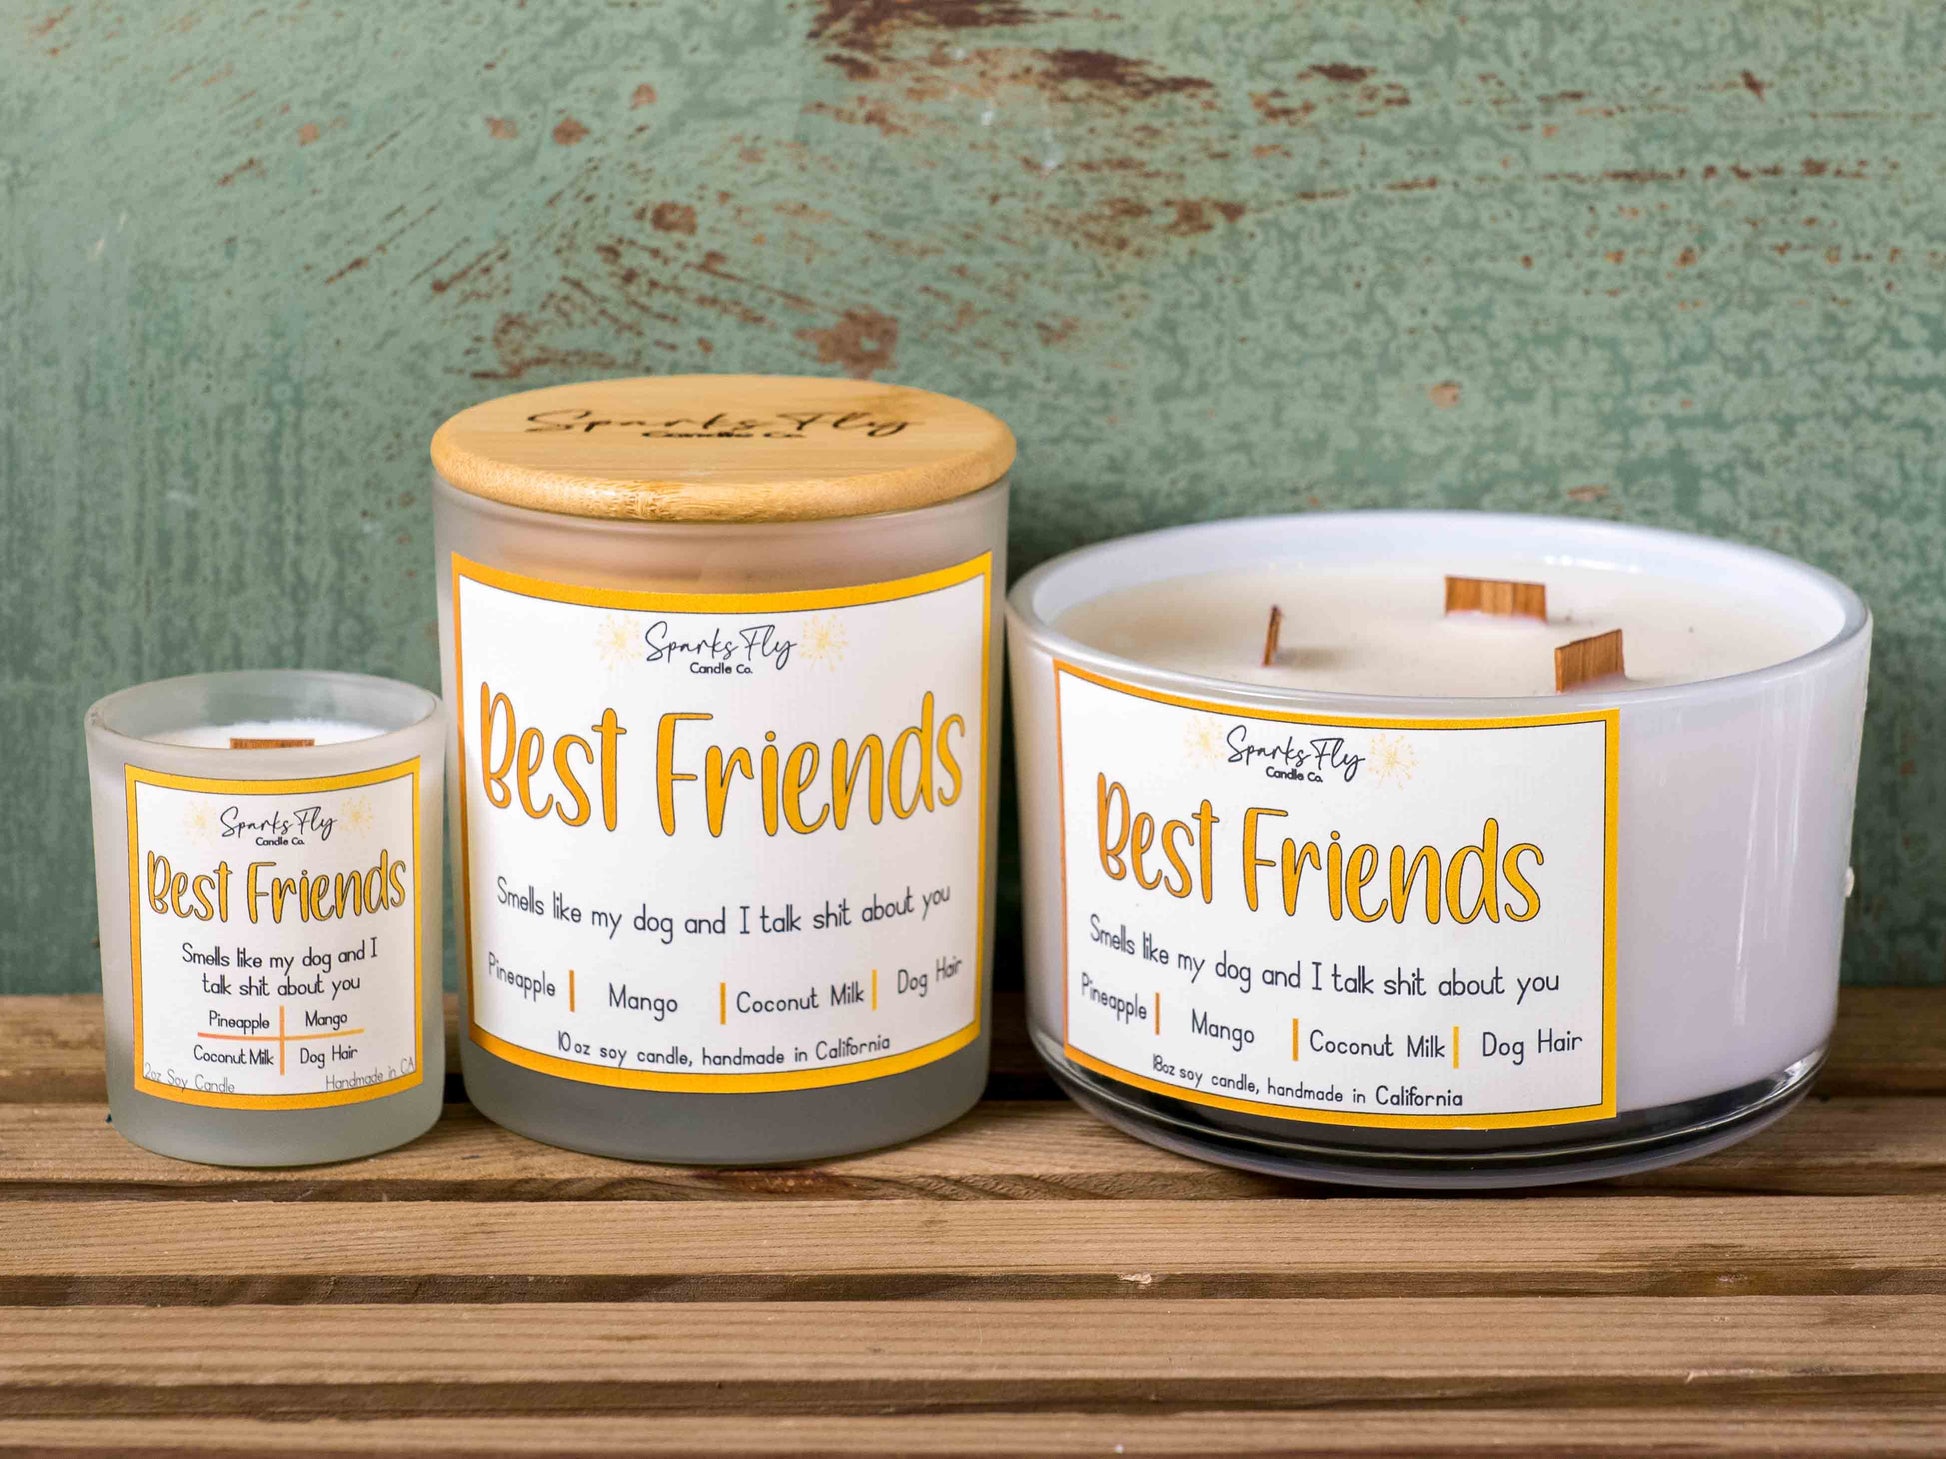 Best Friend sassy candle; playful design hinting at dog-talks with humorous undertone